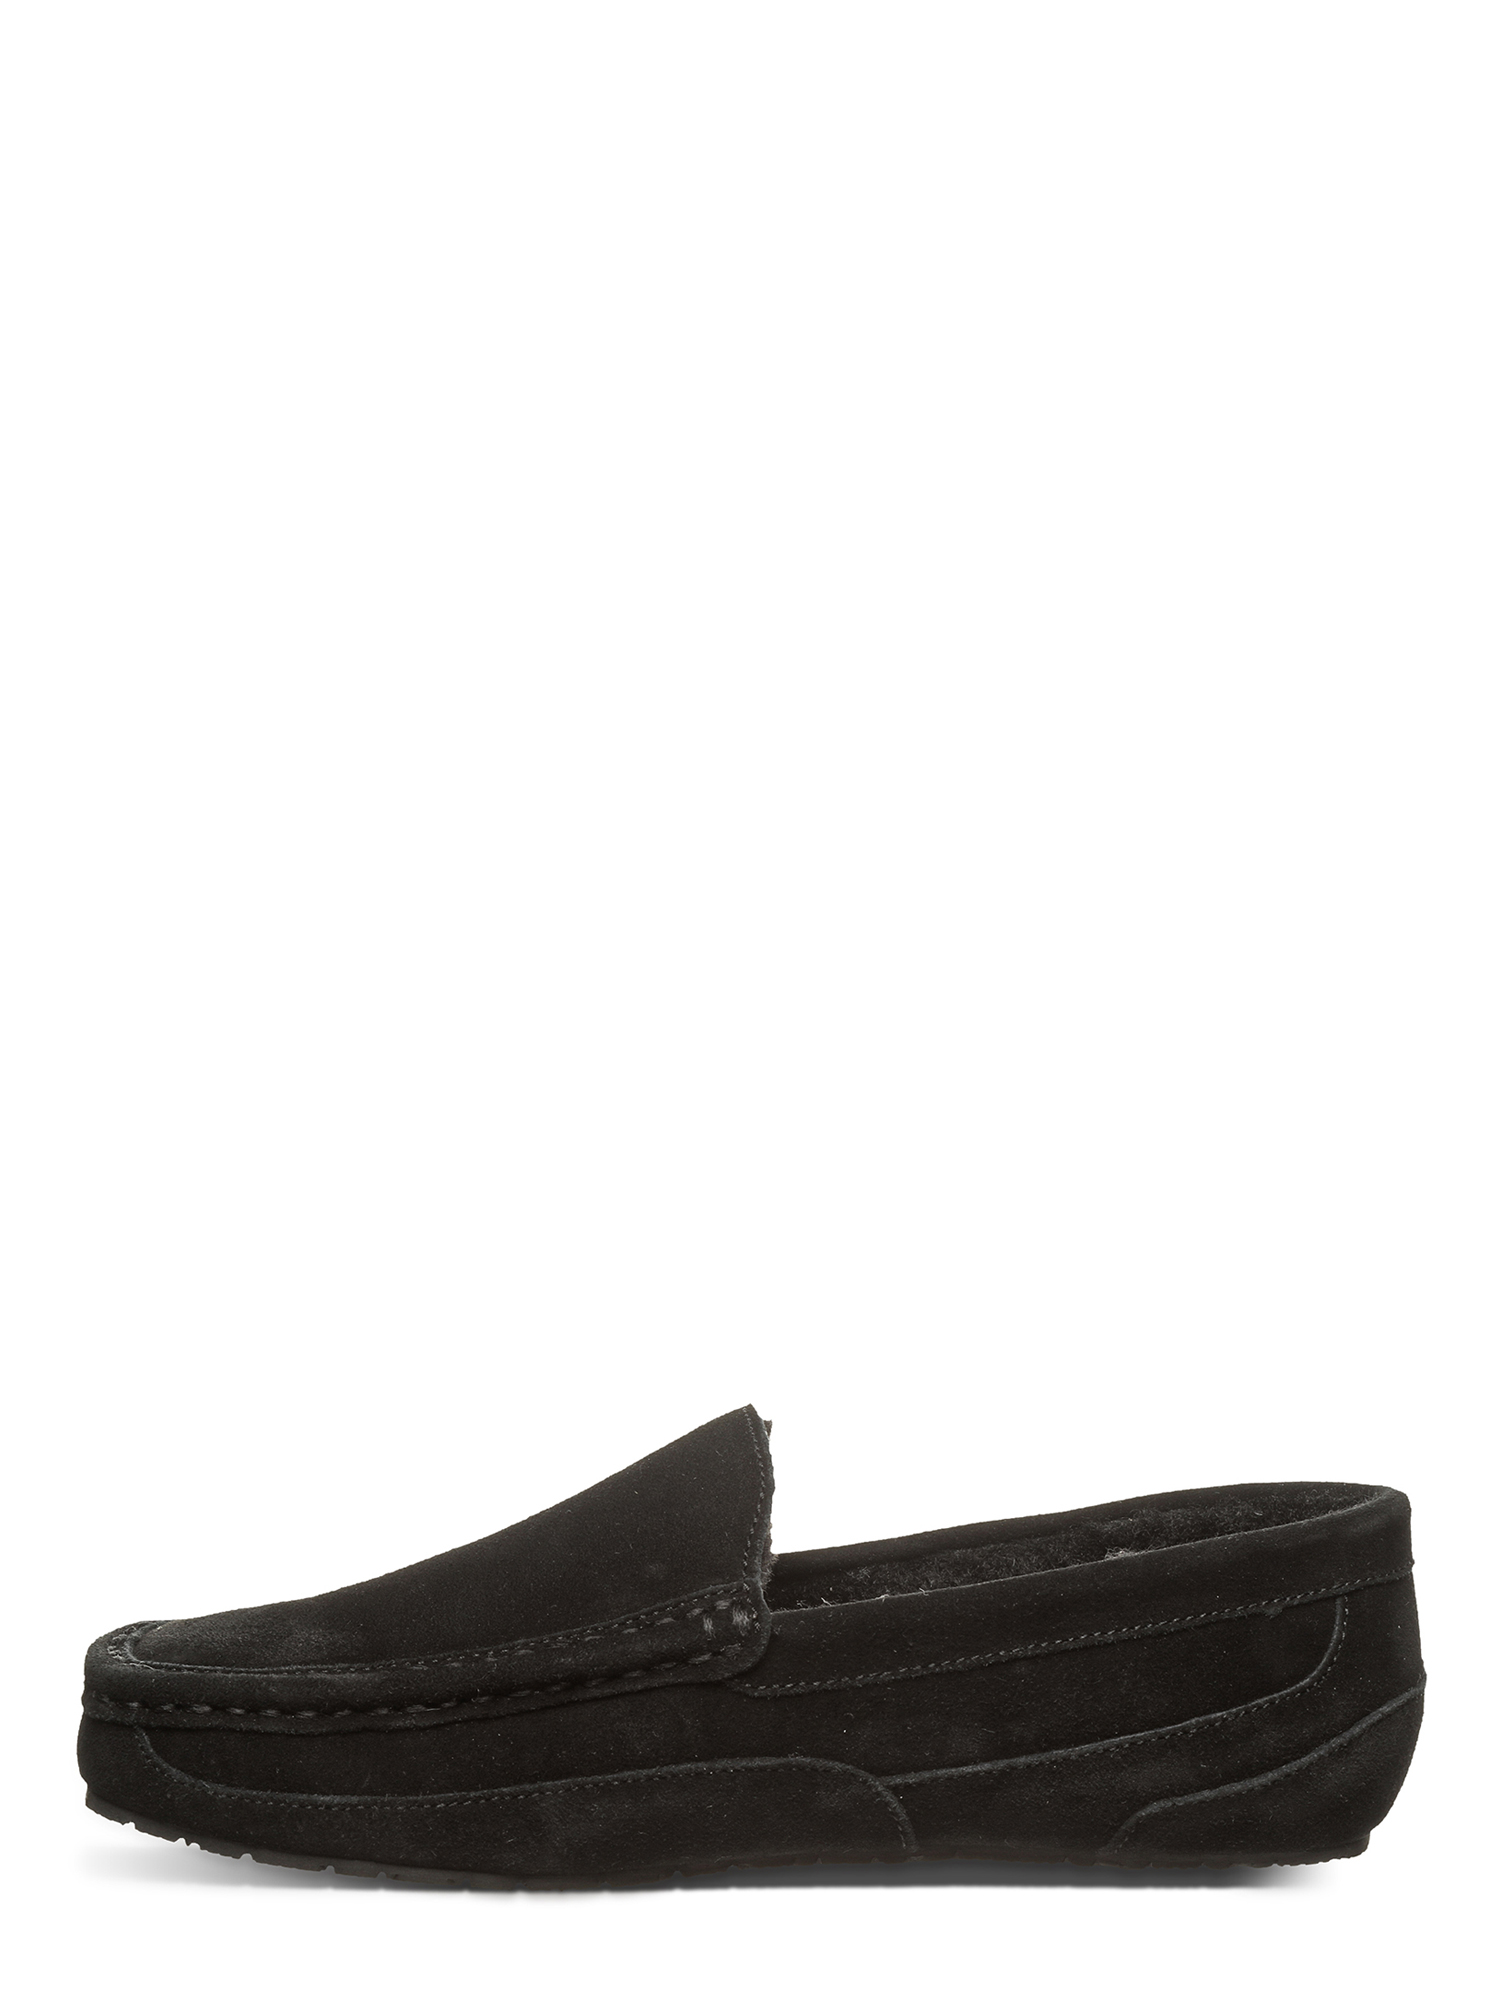 Pawz by Bearpaw Men's Caleb Genuine Suede Moccasin Slippers - image 5 of 5